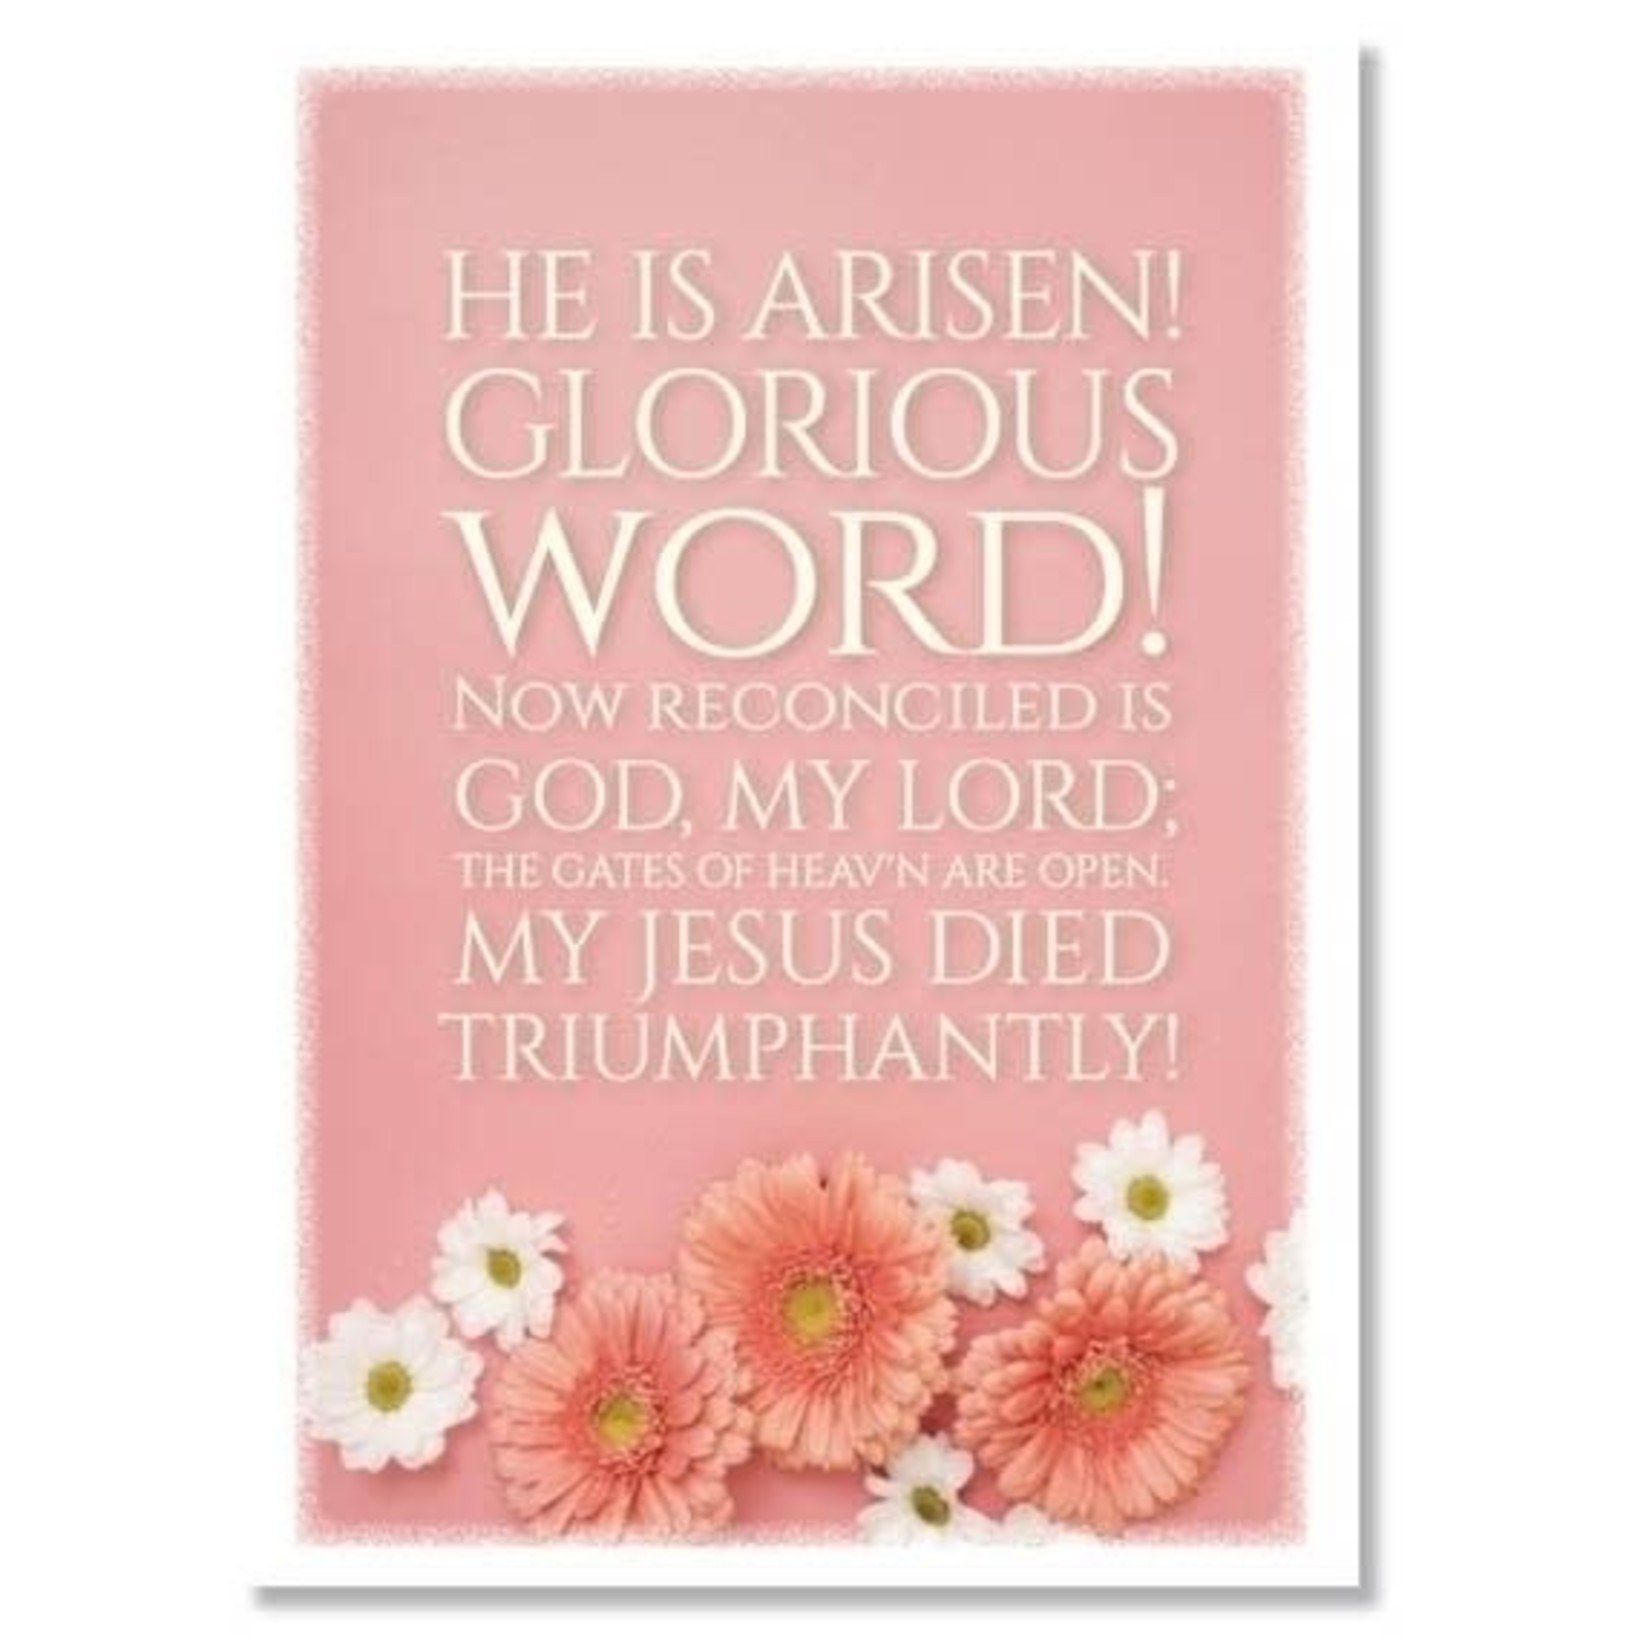 Hymns In My Heart - 5x7" Greeting Card - Easter - He is Arisen!